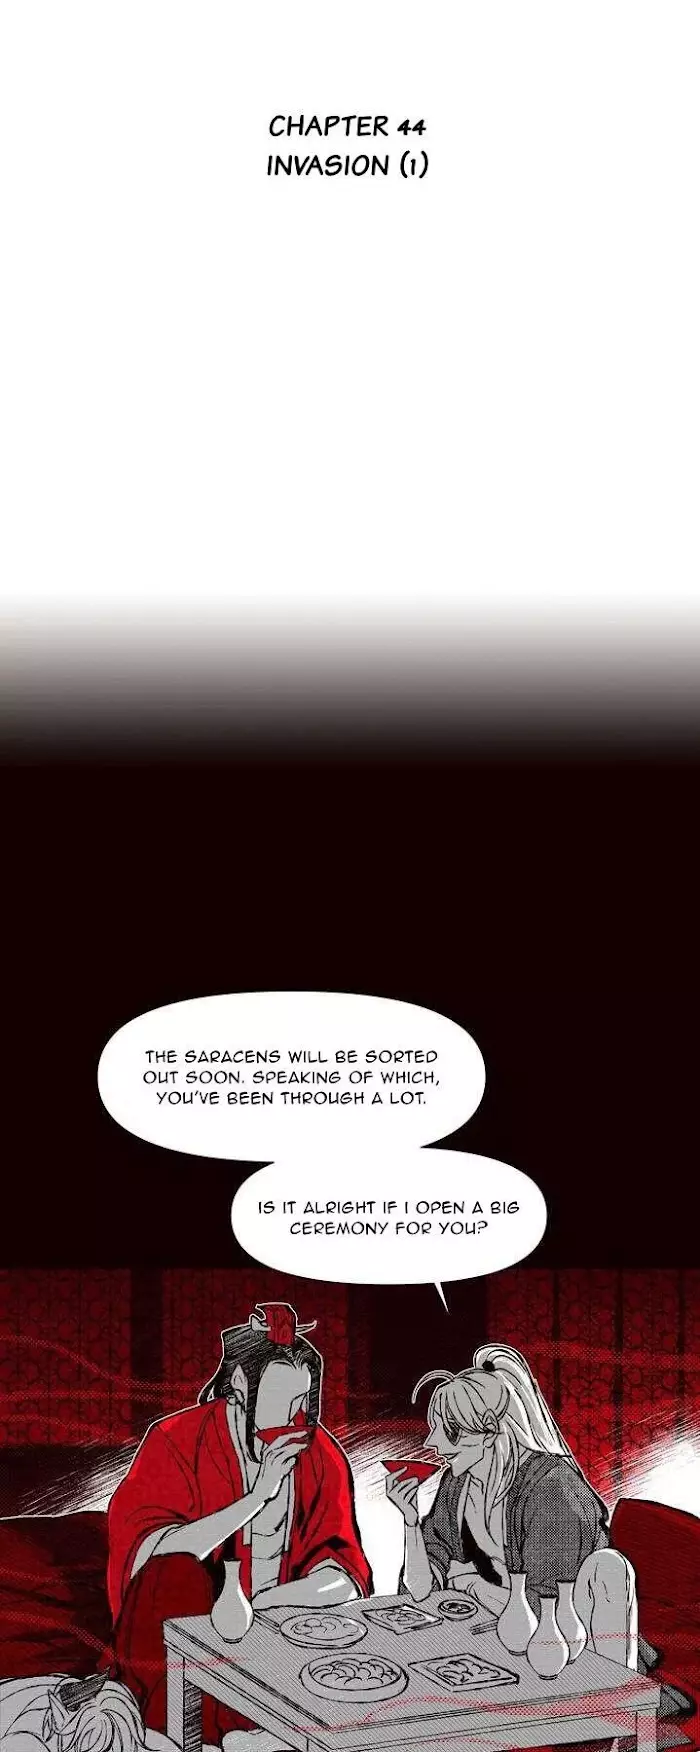 The Sound Of Fire - 44 page 6-9688c1bd